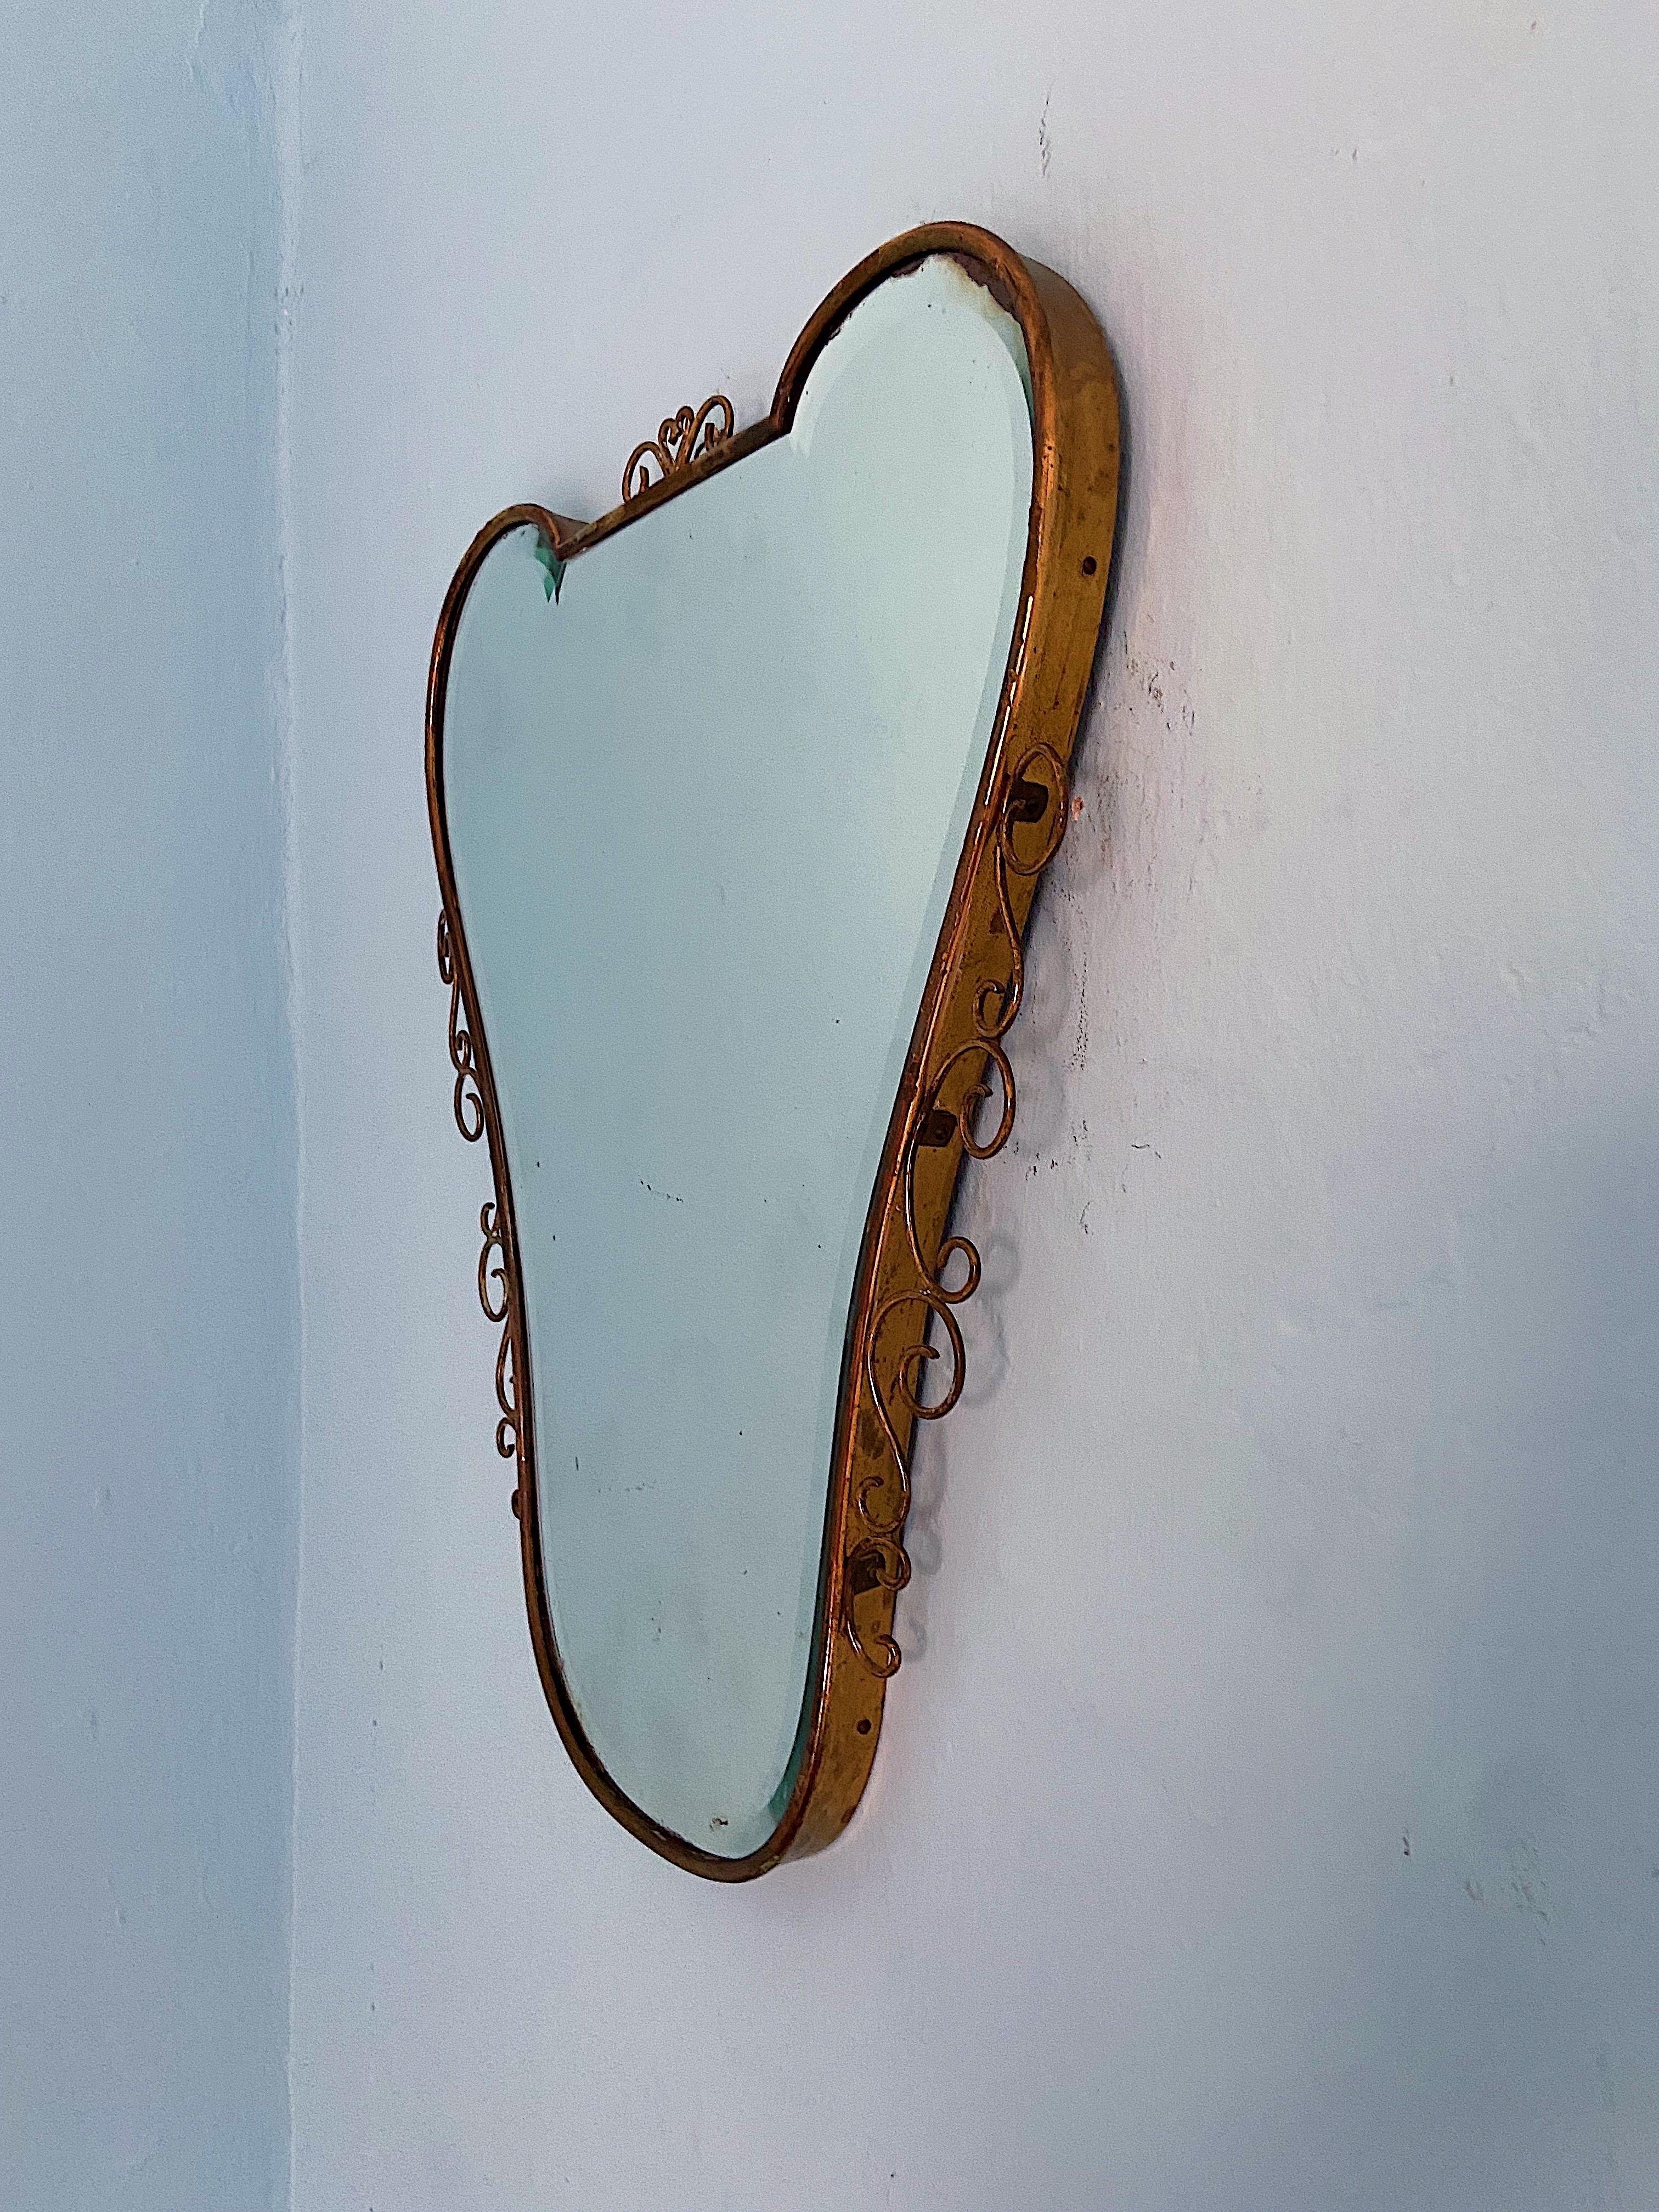 Mid-Century Modern Vintage Oval Wall Mirror Attributed Gio Ponti, 1950s, Italy In Good Condition For Sale In Palermo, PA